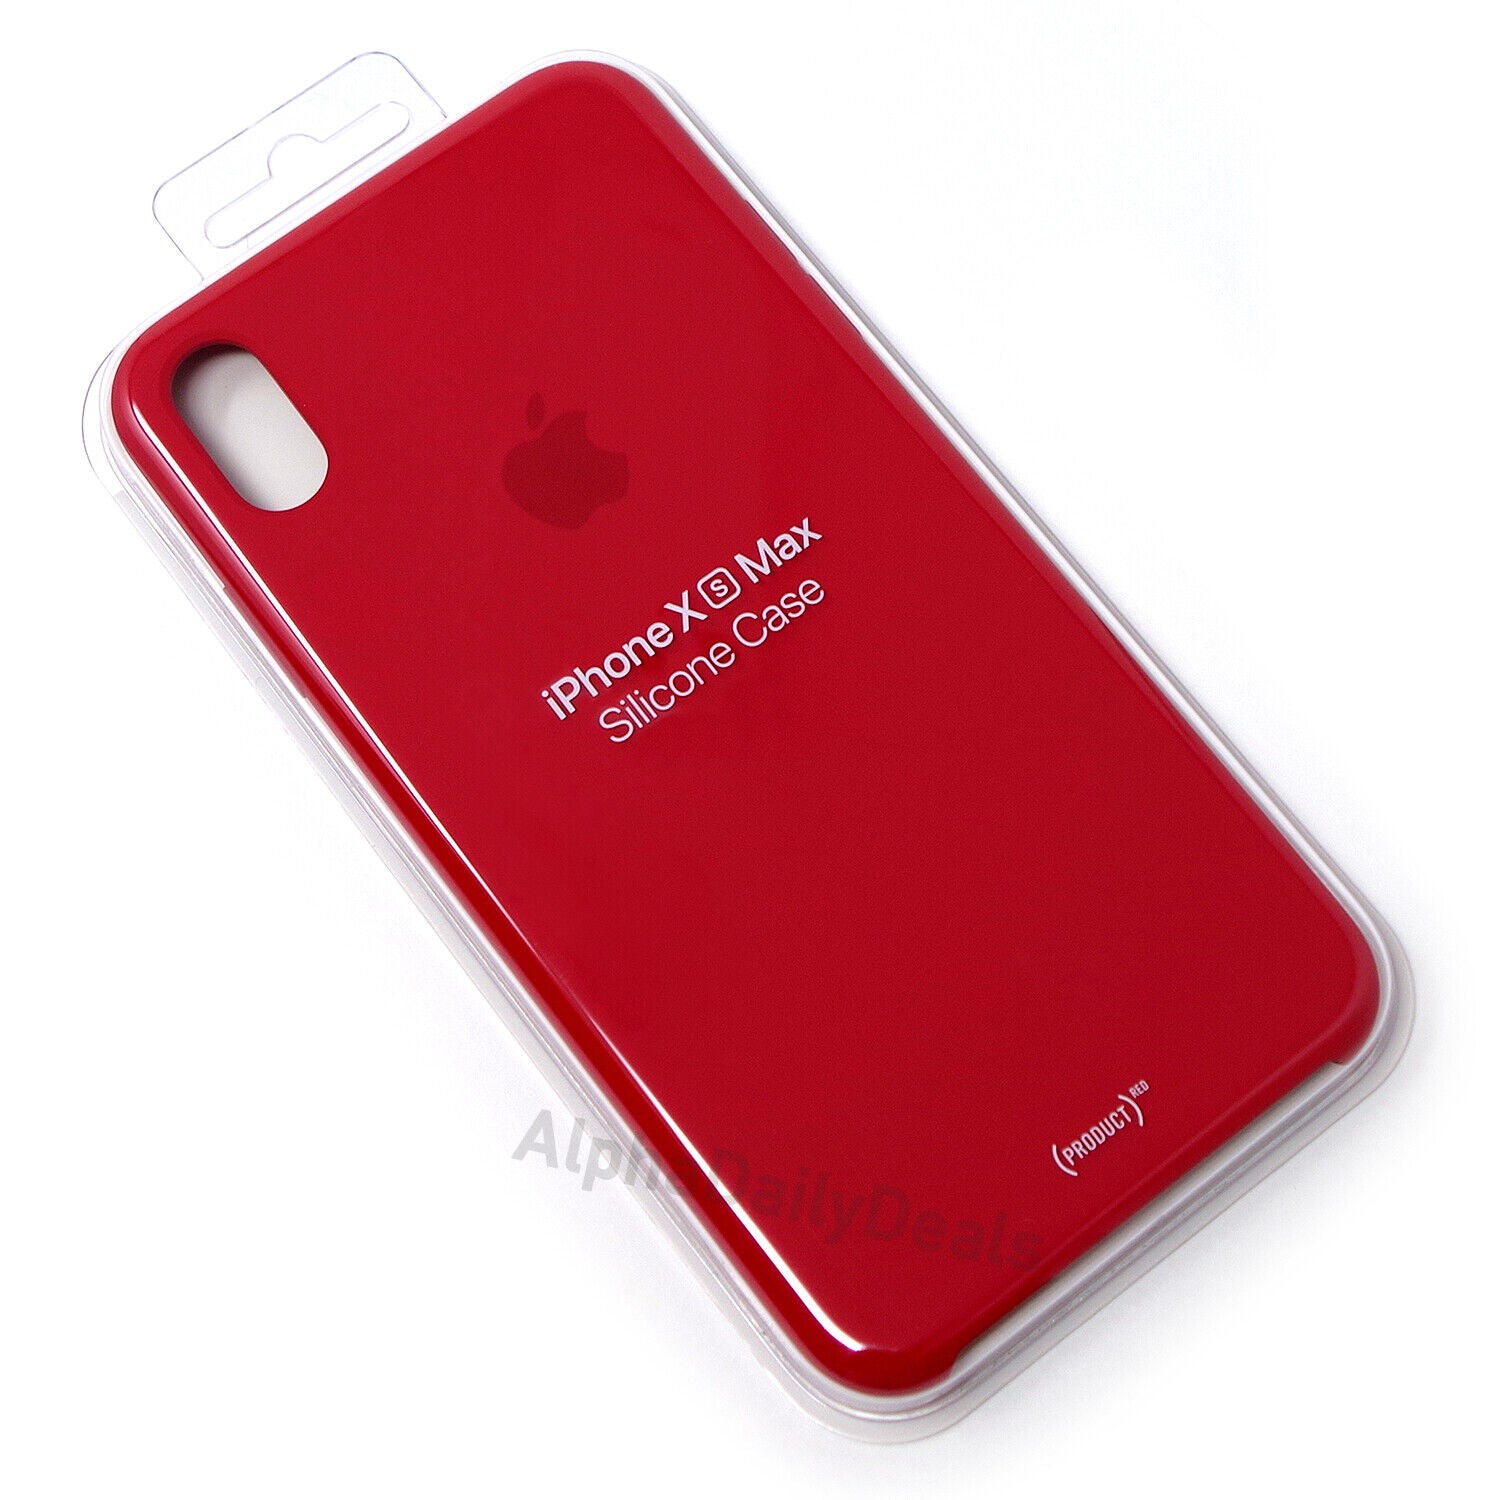 Genuine OEM Apple iPhone XS Max Silicone Case - Red